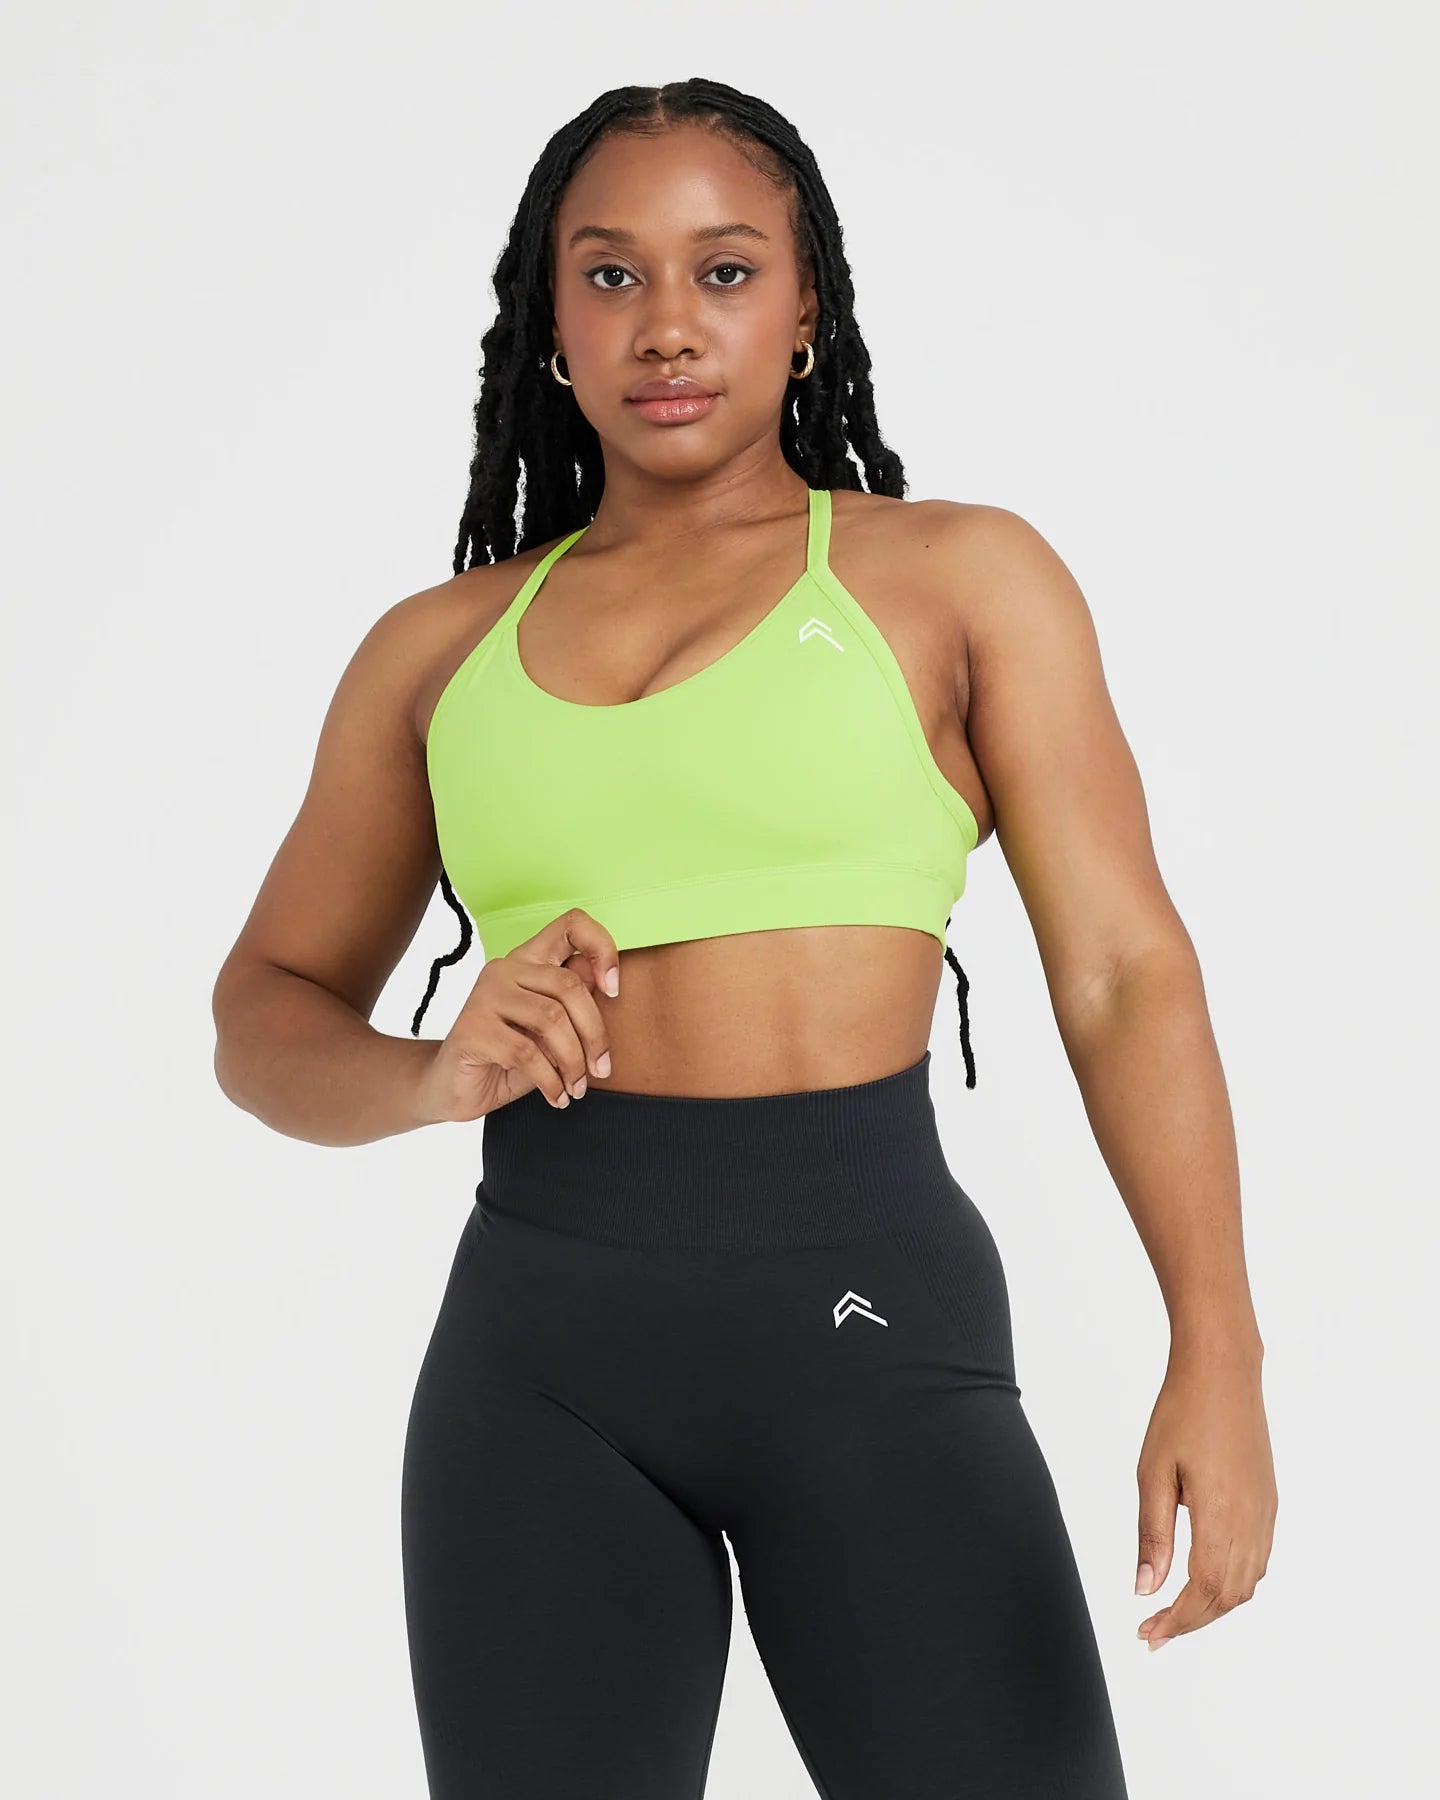 THE NEW ONER ACTIVE CLASSIC COLLECTION  Activewear photoshoot, Fitness  photoshoot, Swimsuits photoshoot